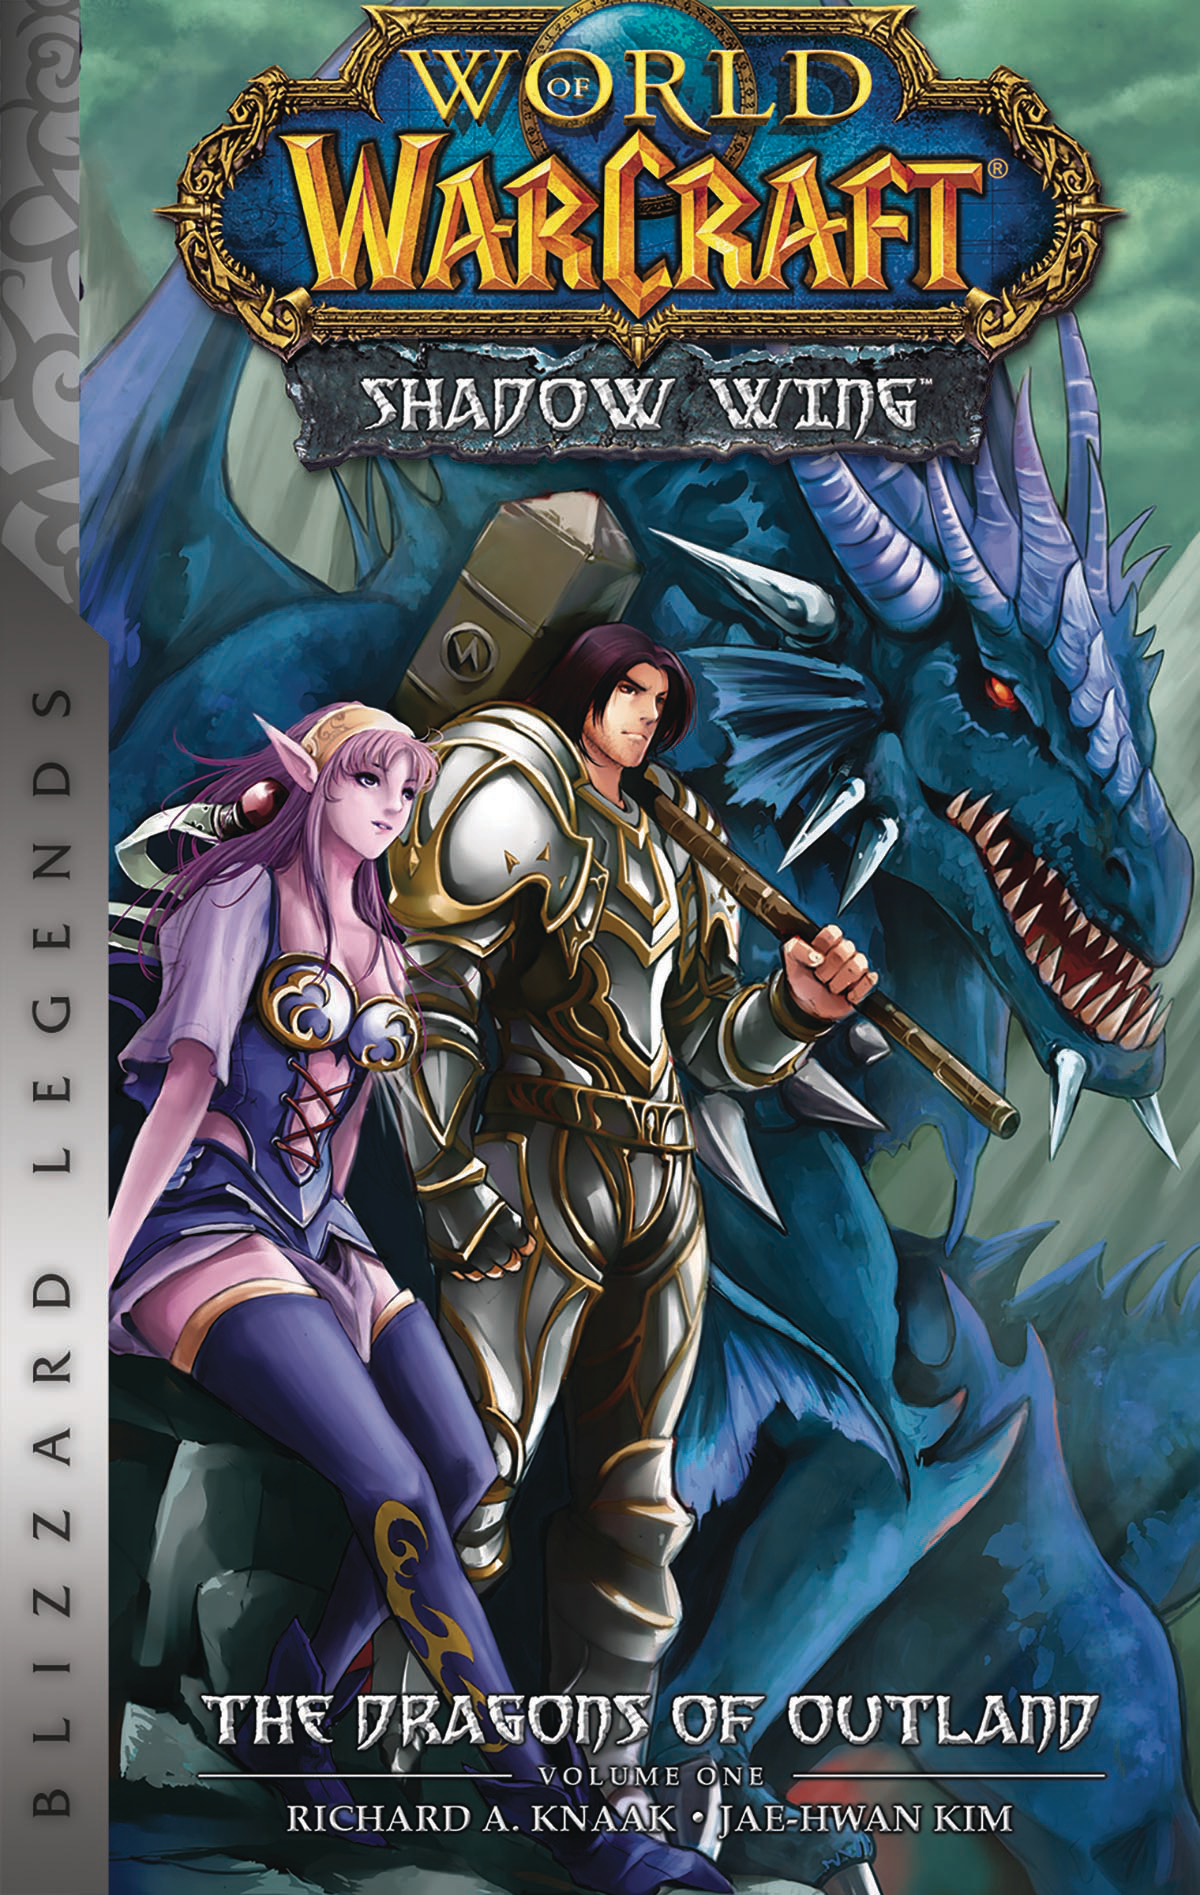 Warcraft Shadow Wing Graphic Novel Volume 1 Dragons of Outland